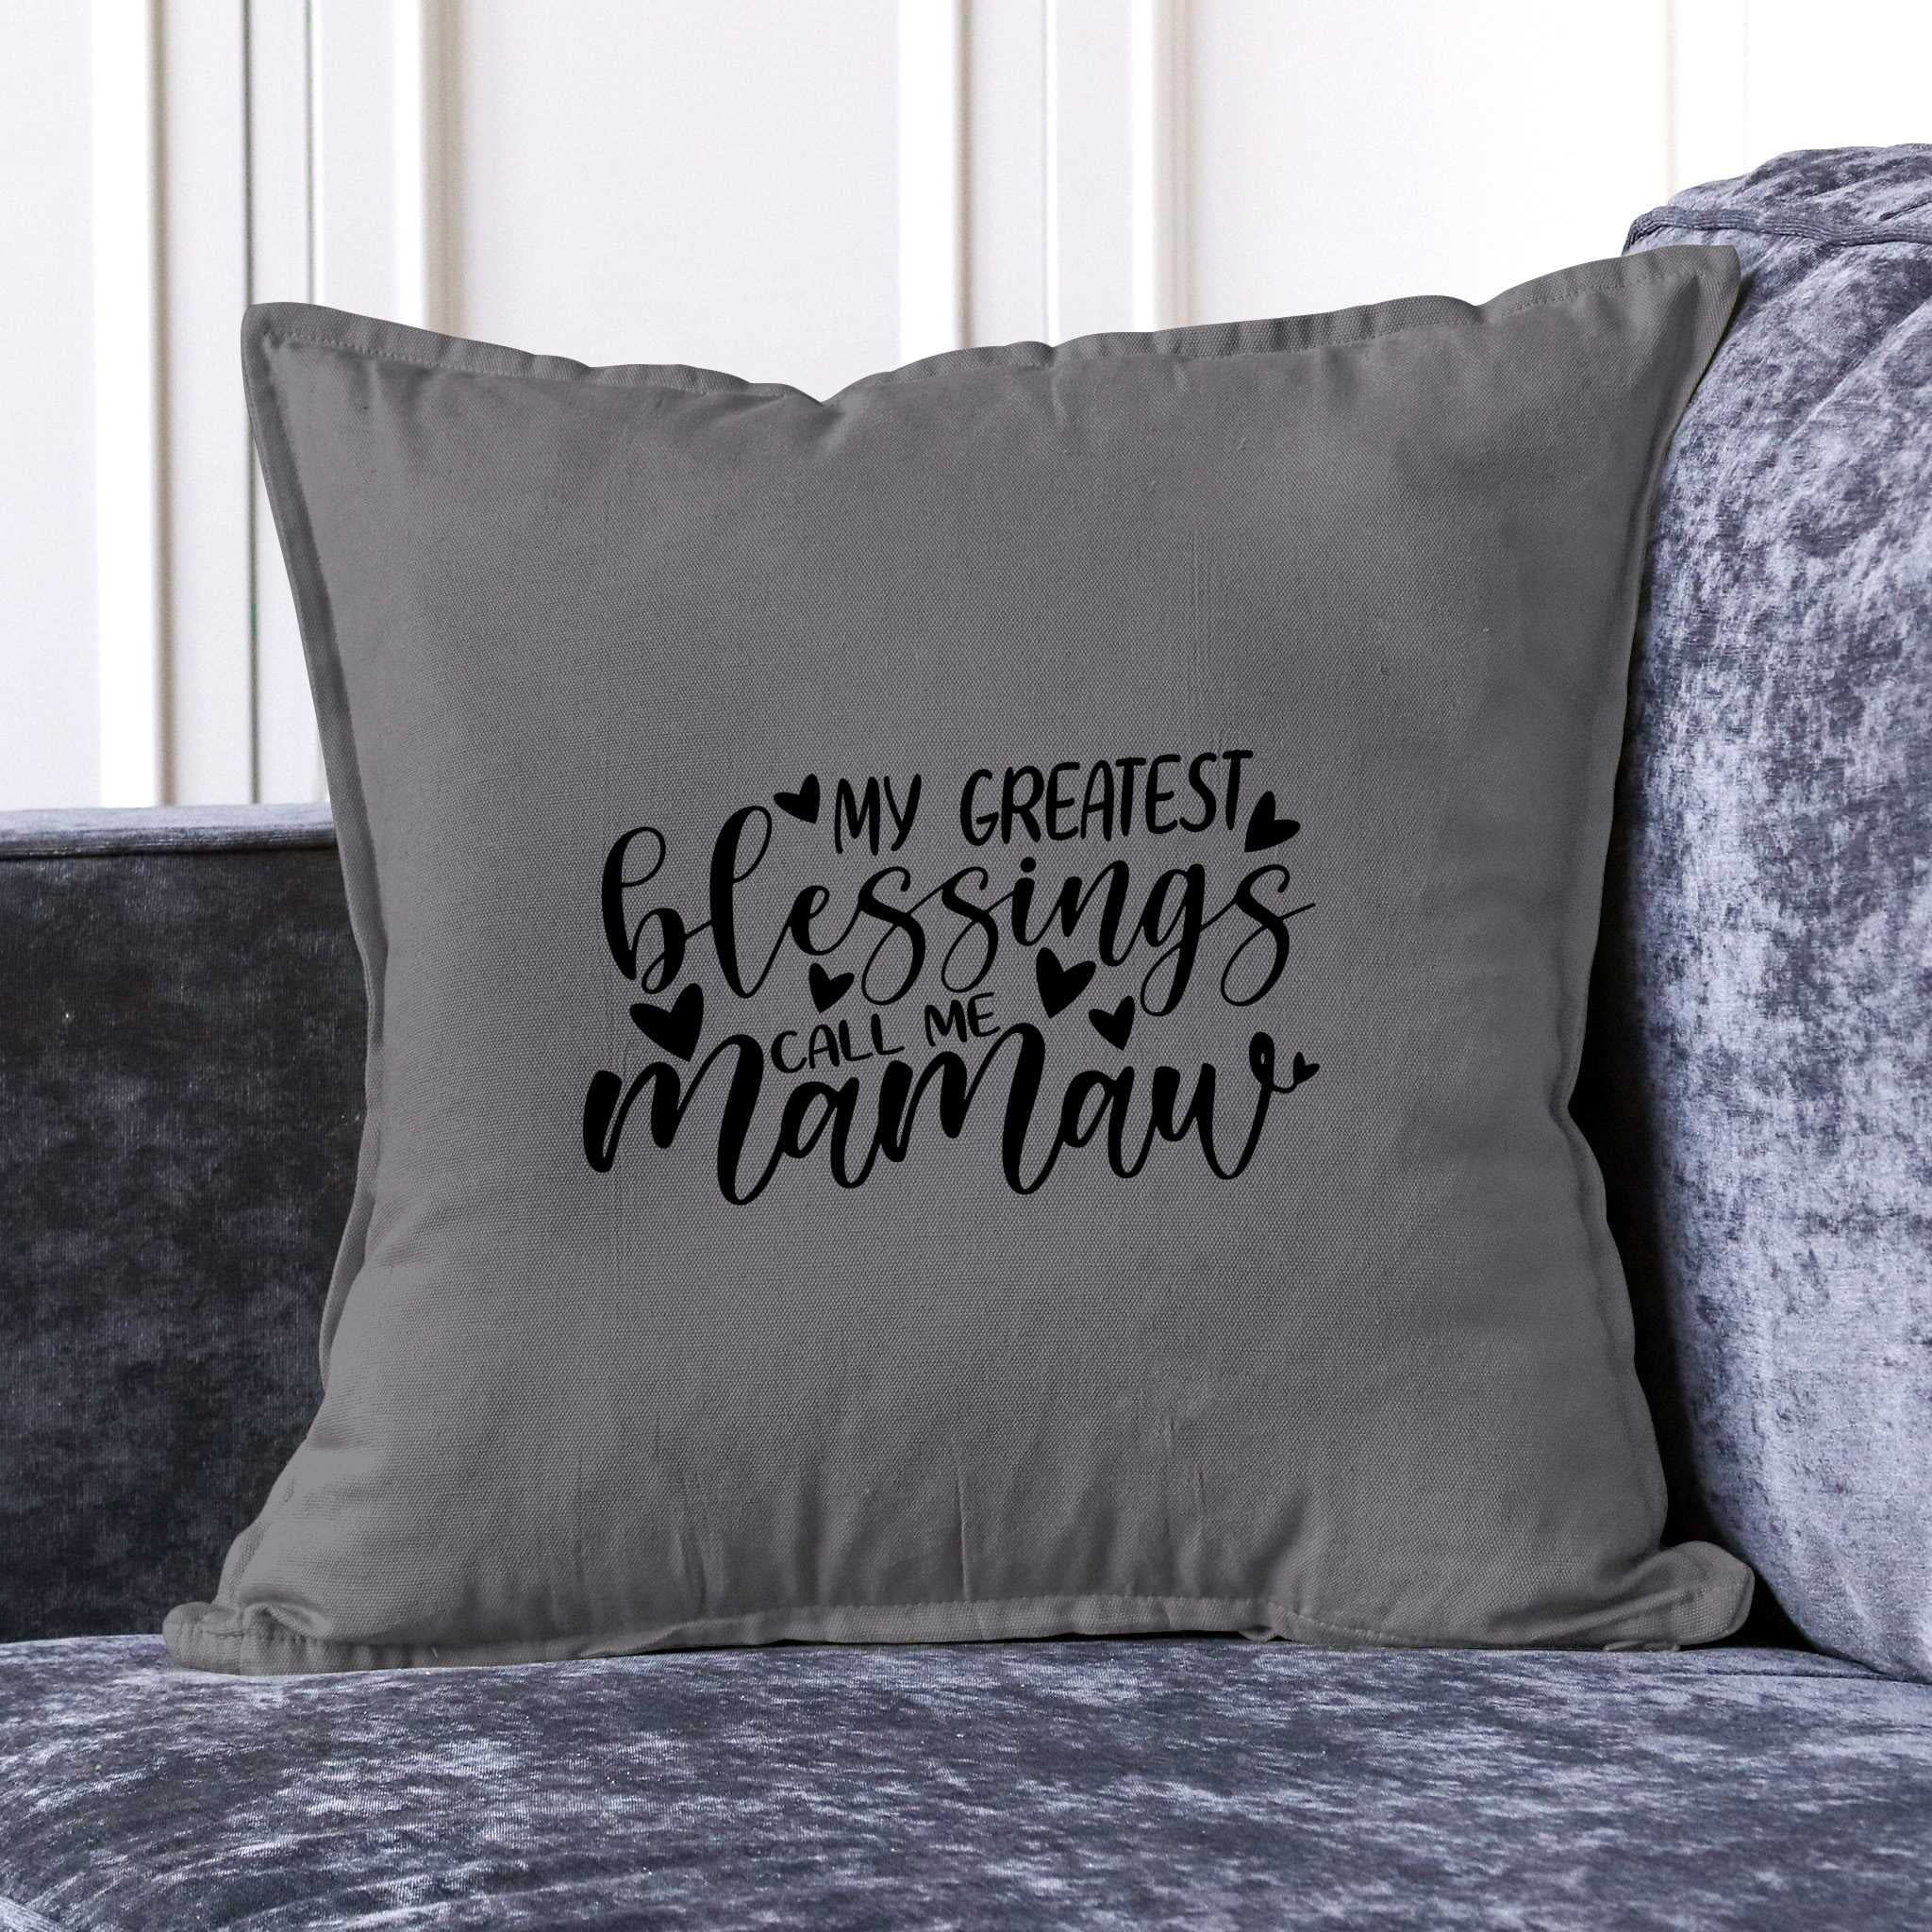 Enough Love to Go Around Personalized Pillows – Mamas Blessings